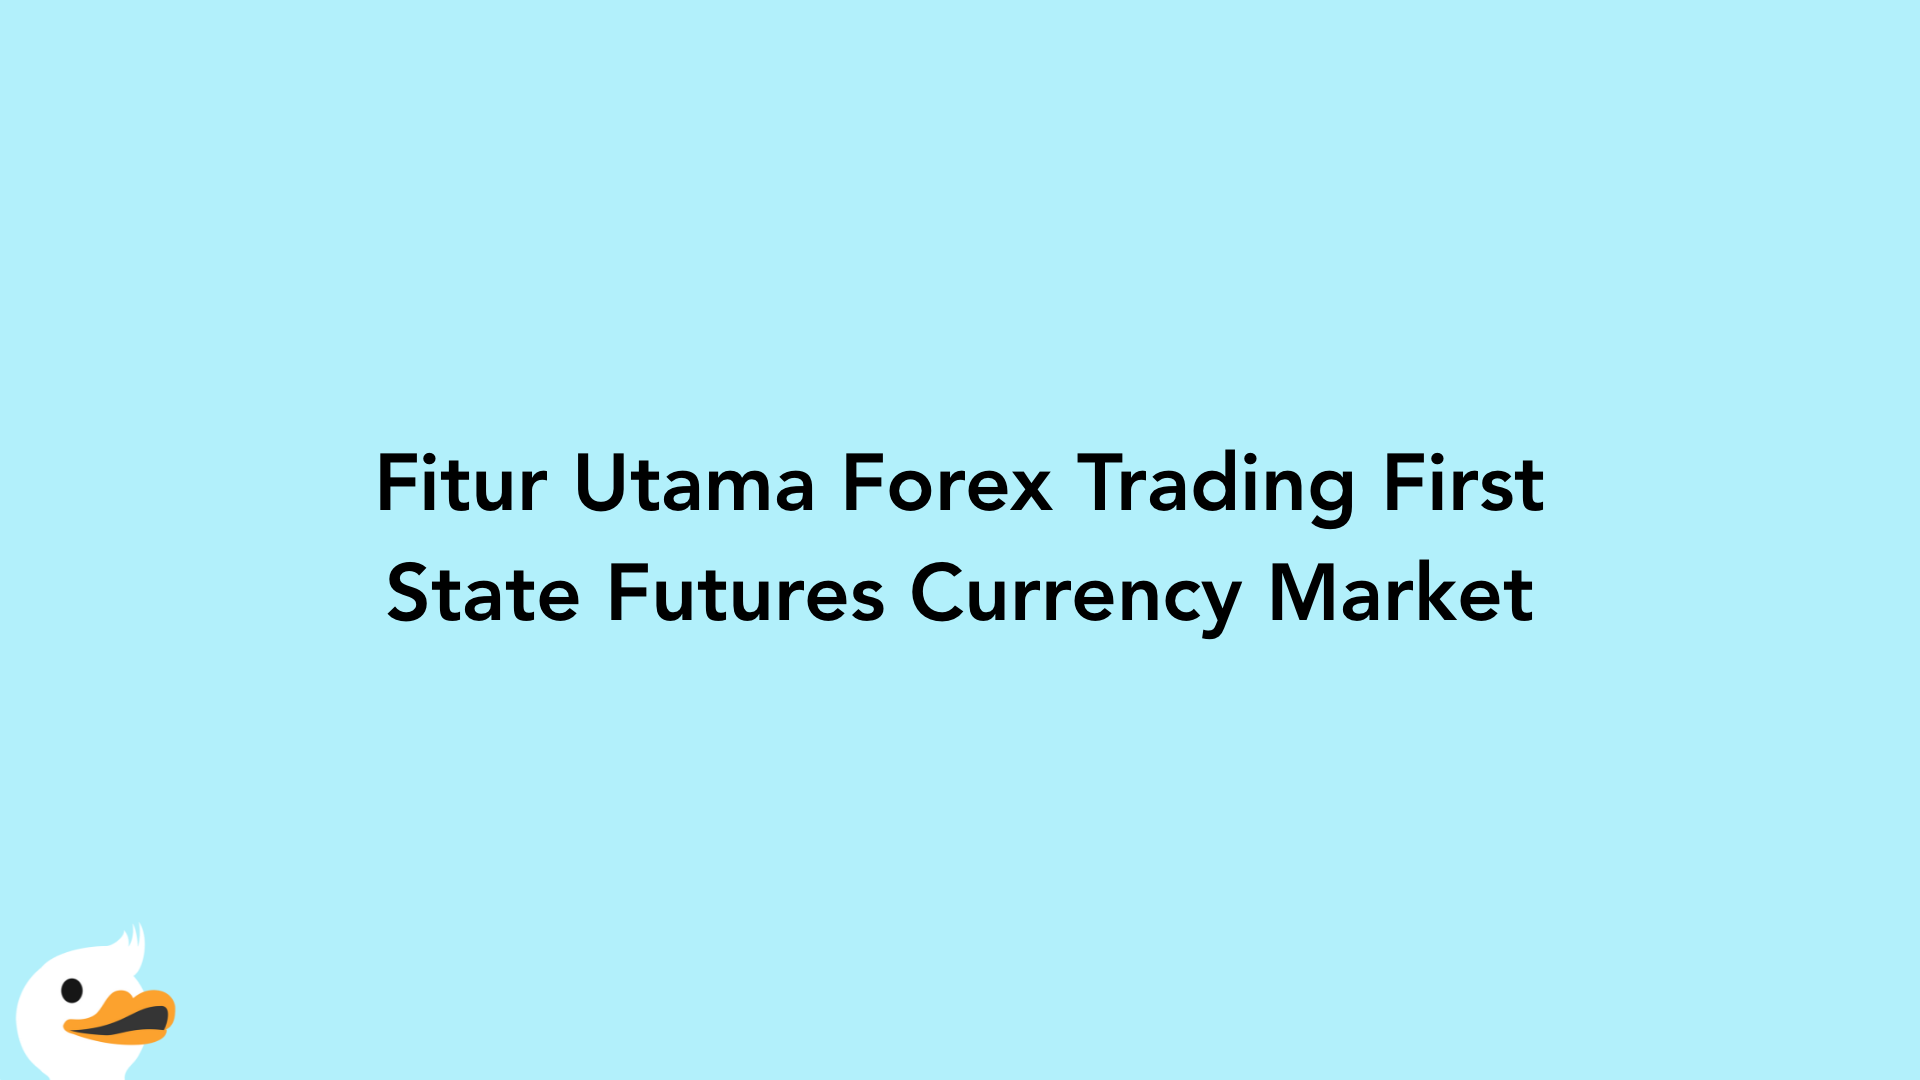 Fitur Utama Forex Trading First State Futures Currency Market